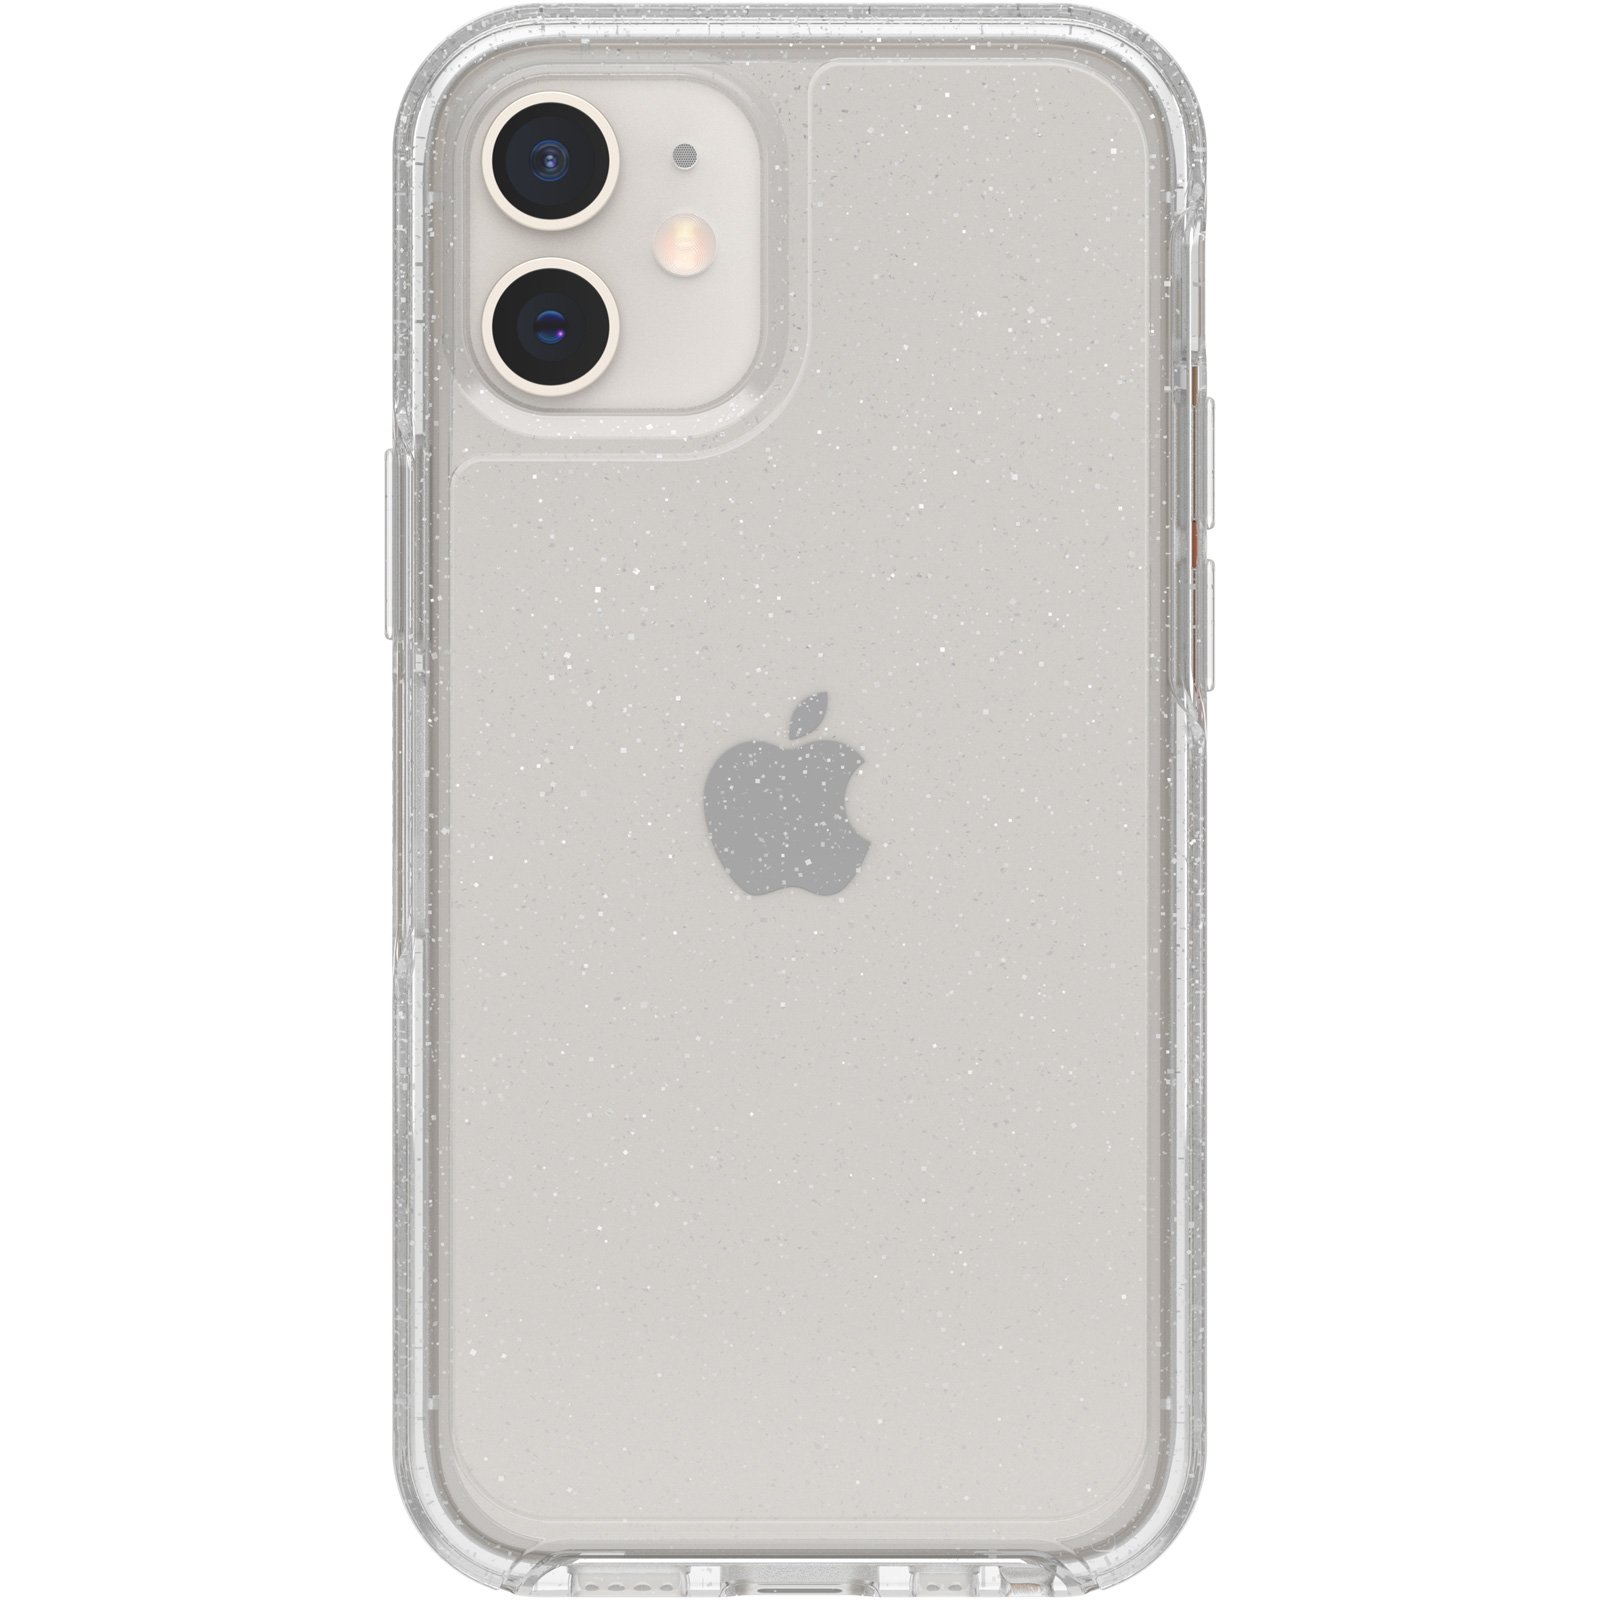 Photos - Case OtterBox iPhone 12 mini Symmetry Series Clear  Stardust 2.0 77-65374 